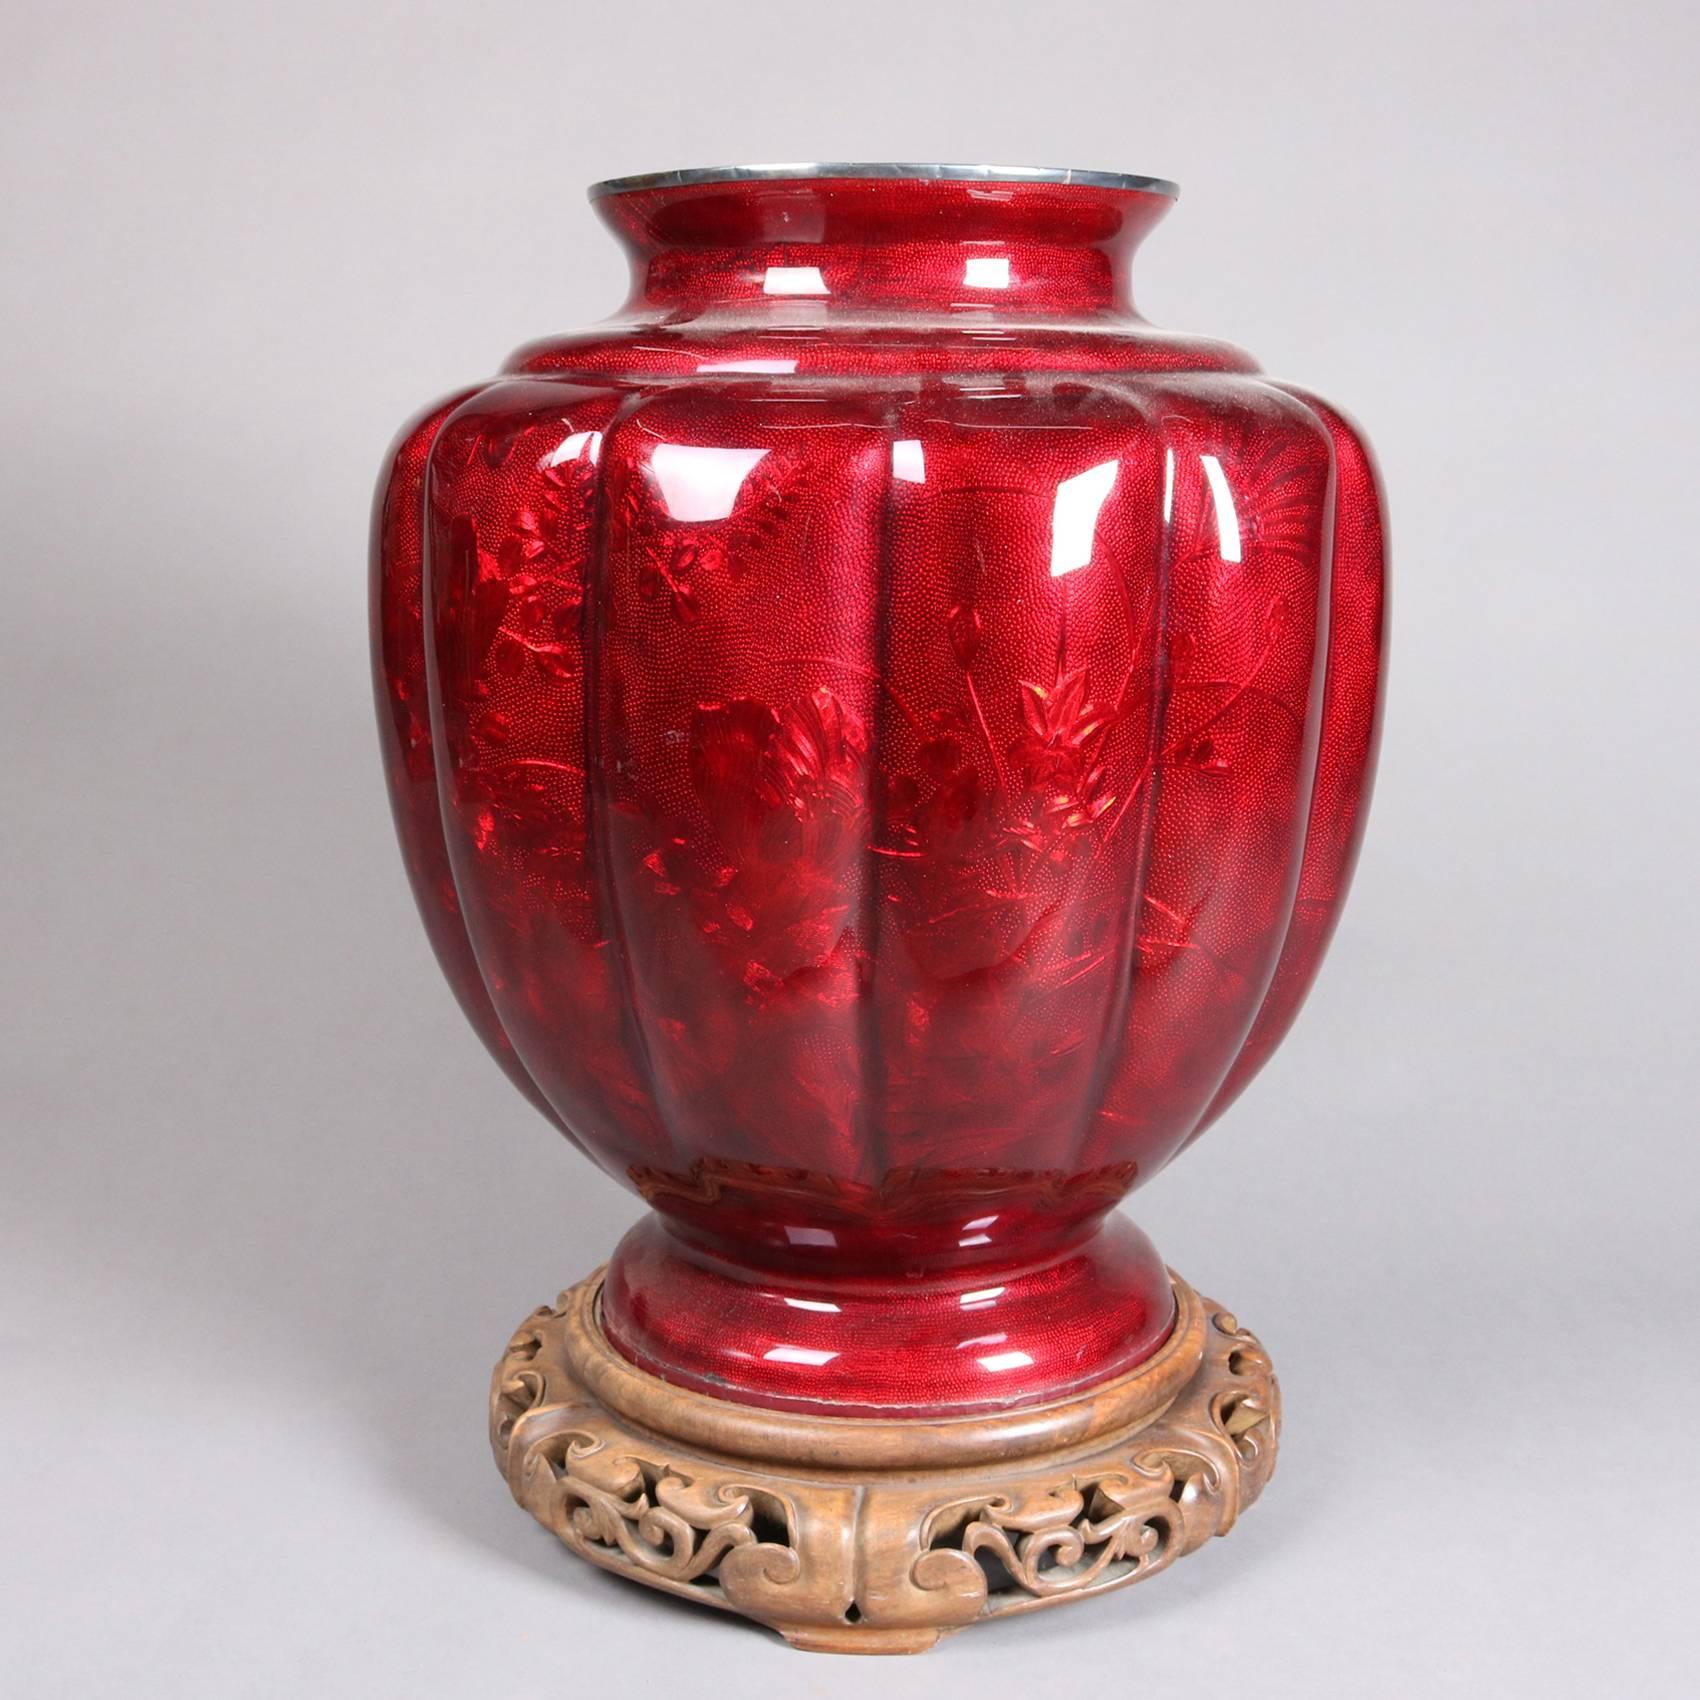 Antique monumental Meiji period Ginbari urn form floor vase features pigeon blood red cloisonne enamel and embossed foliate and stippled foil, silvered rim, seated on carved and pierced base, 20th century

Measures: 27